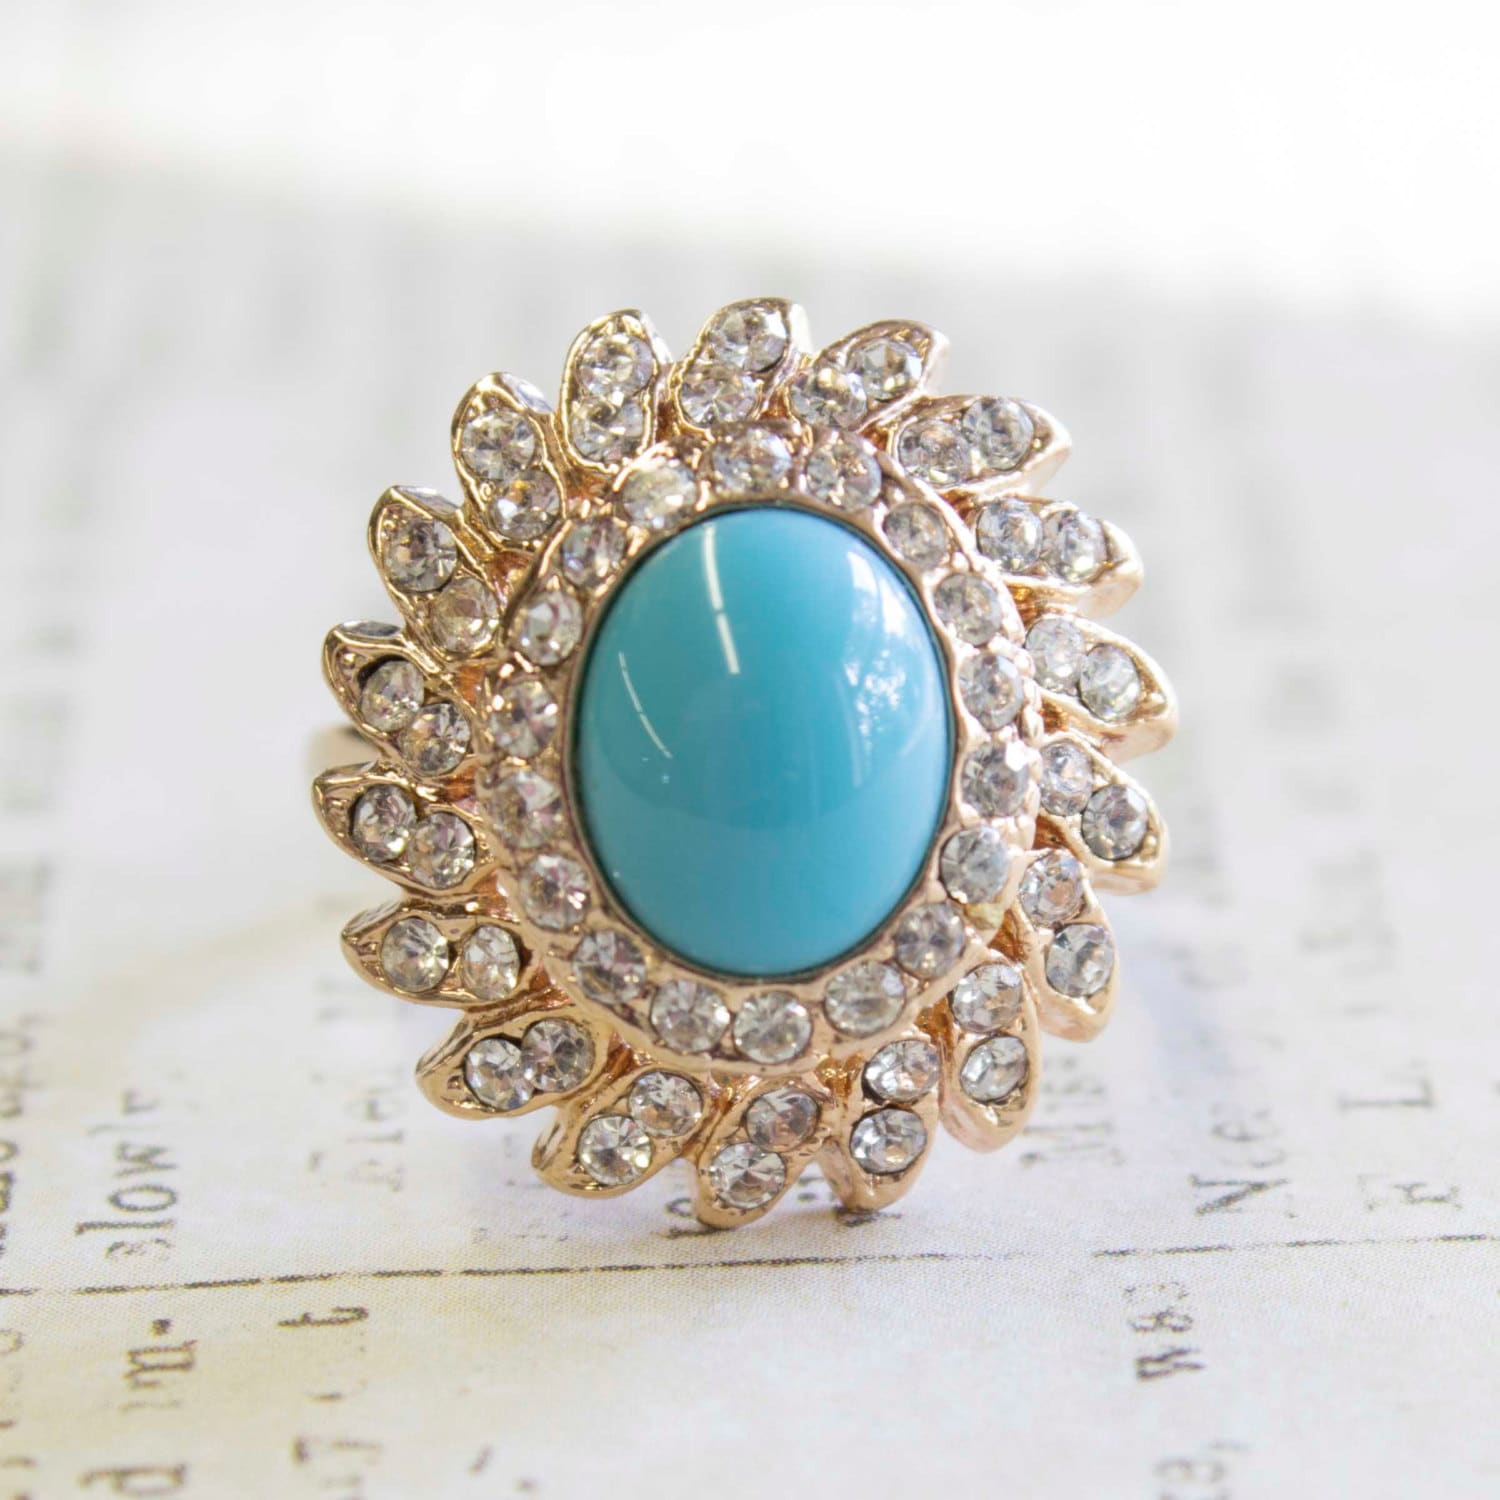 Vintage Ring Turquoise Bead with Clear Swarovski Crystals 18k Gold Ring #R106 - Limited Stock - Never Worn